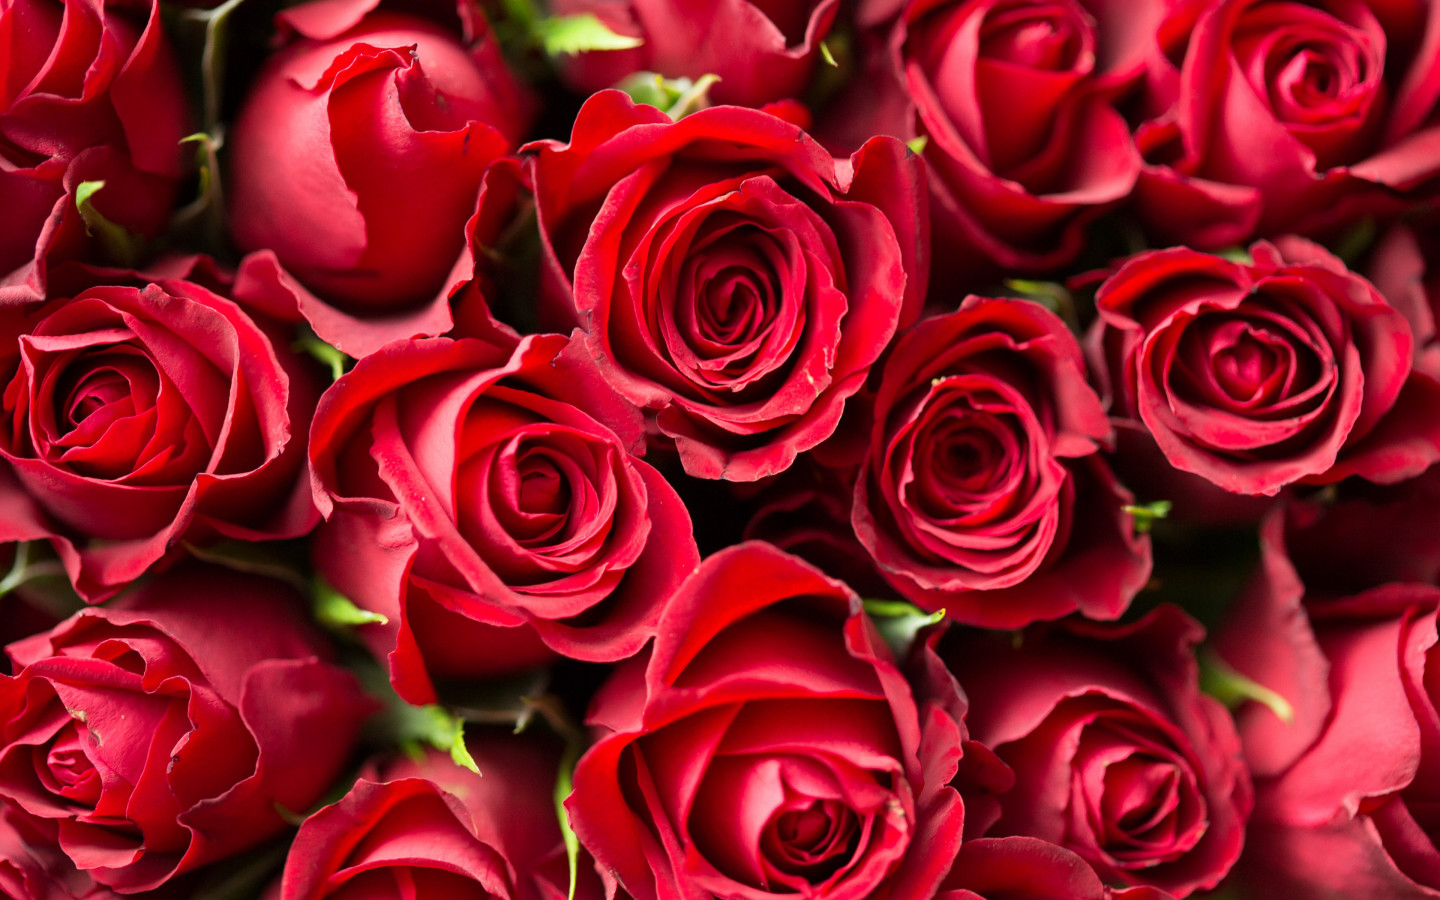 Lots of red roses wallpaper 1440x900